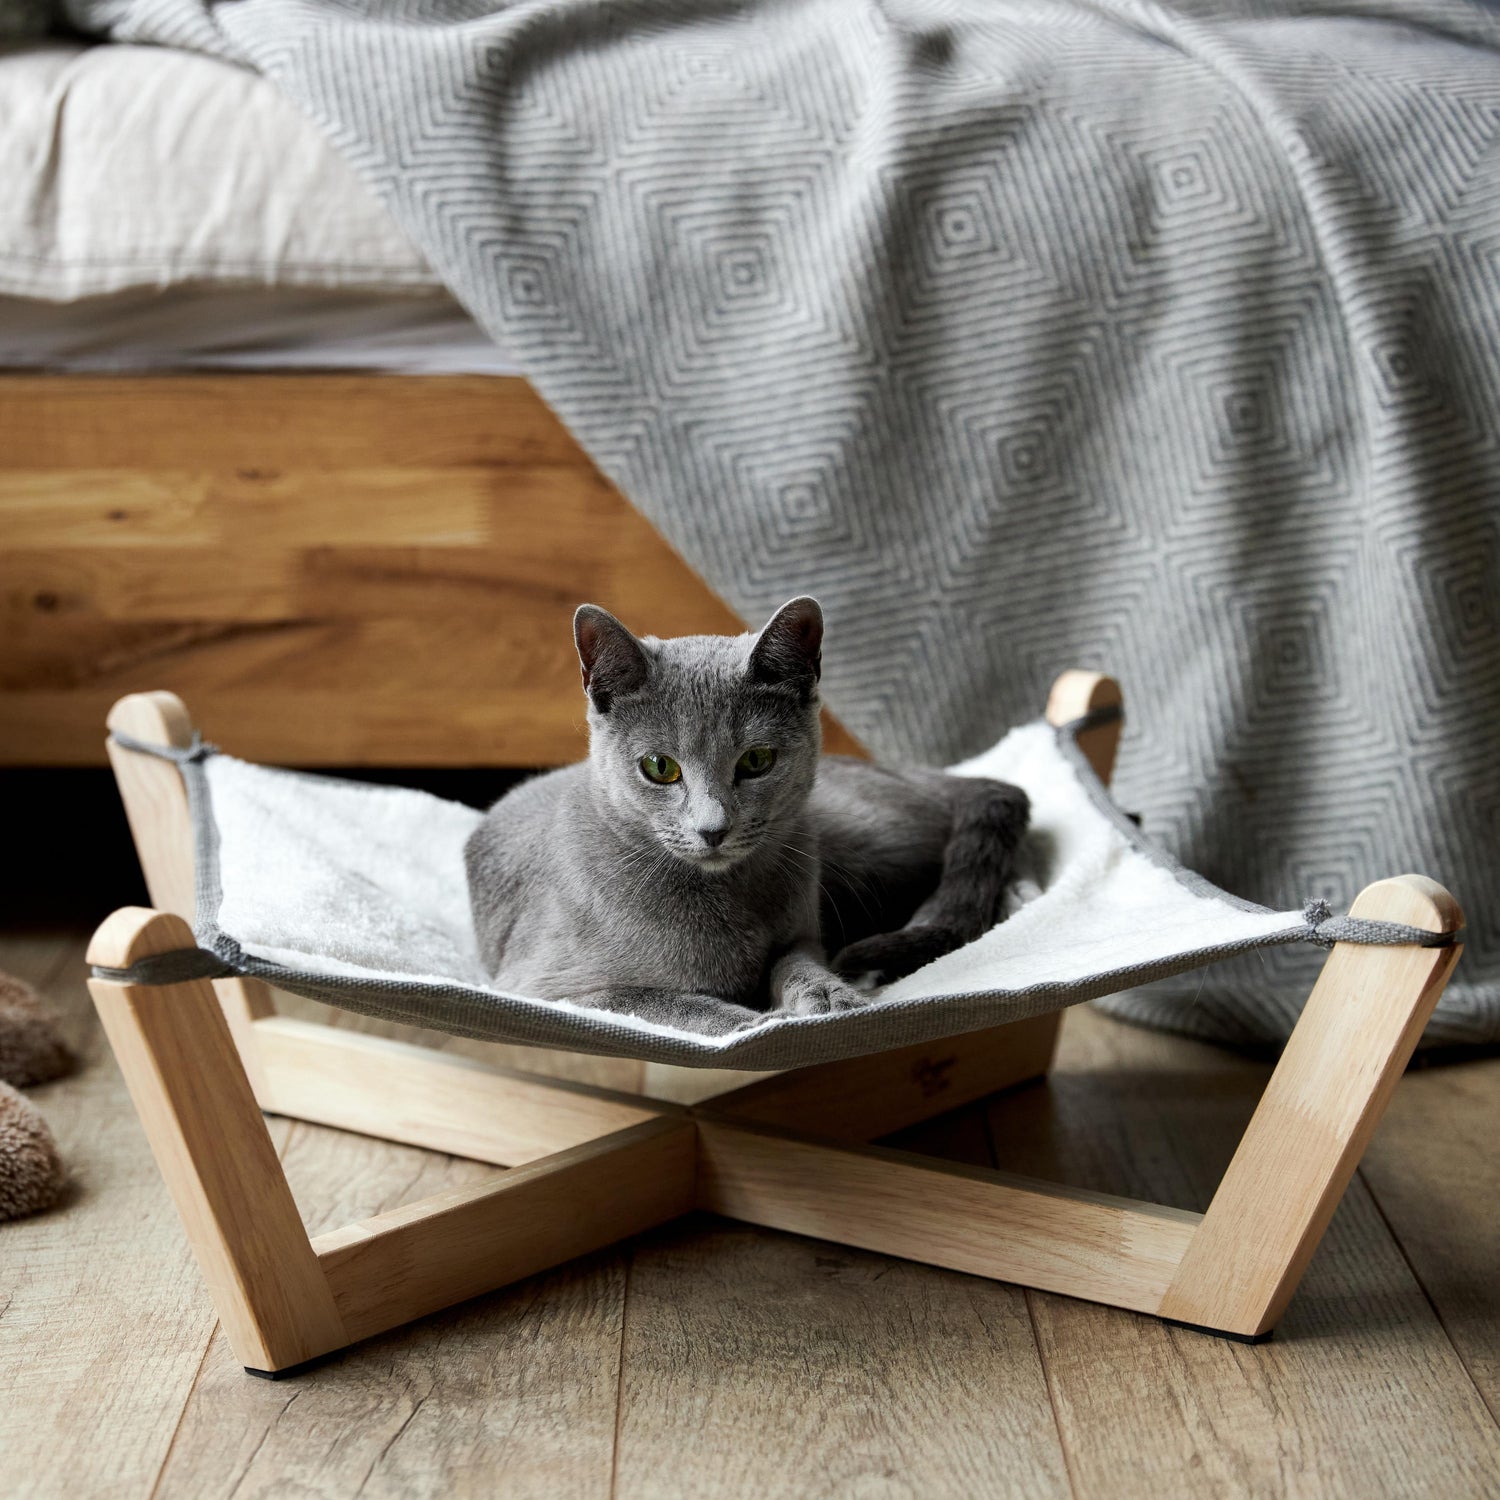 Pet-Friendly Home: Stylish Decor and Essential Products